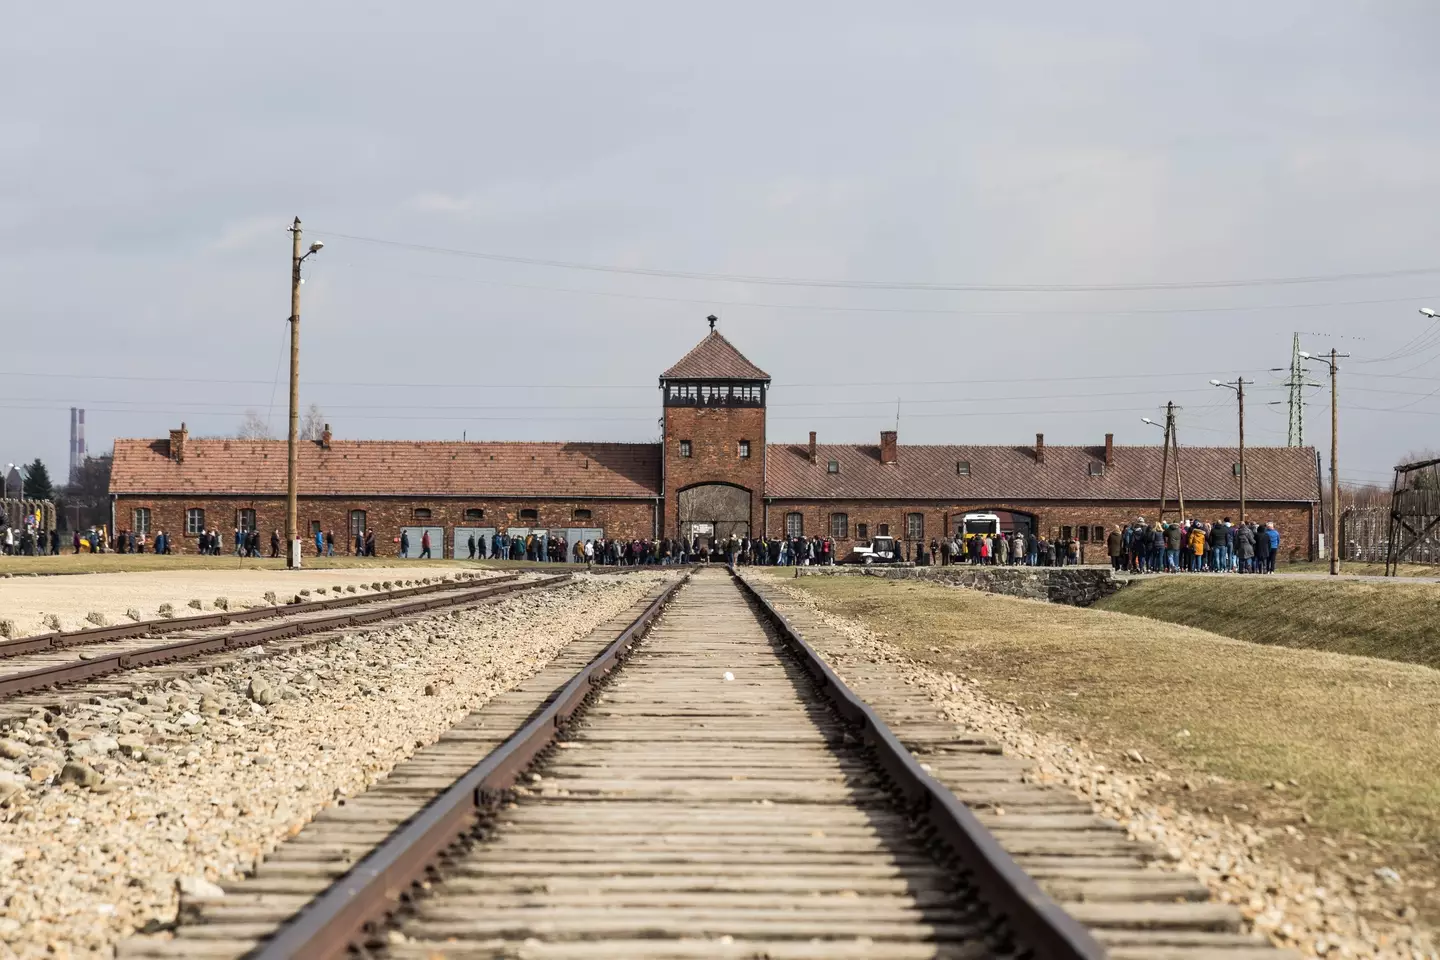 The Auschwitz Memorial recently called out anti-vaxxers for comparing the pandemic to the Holocaust.